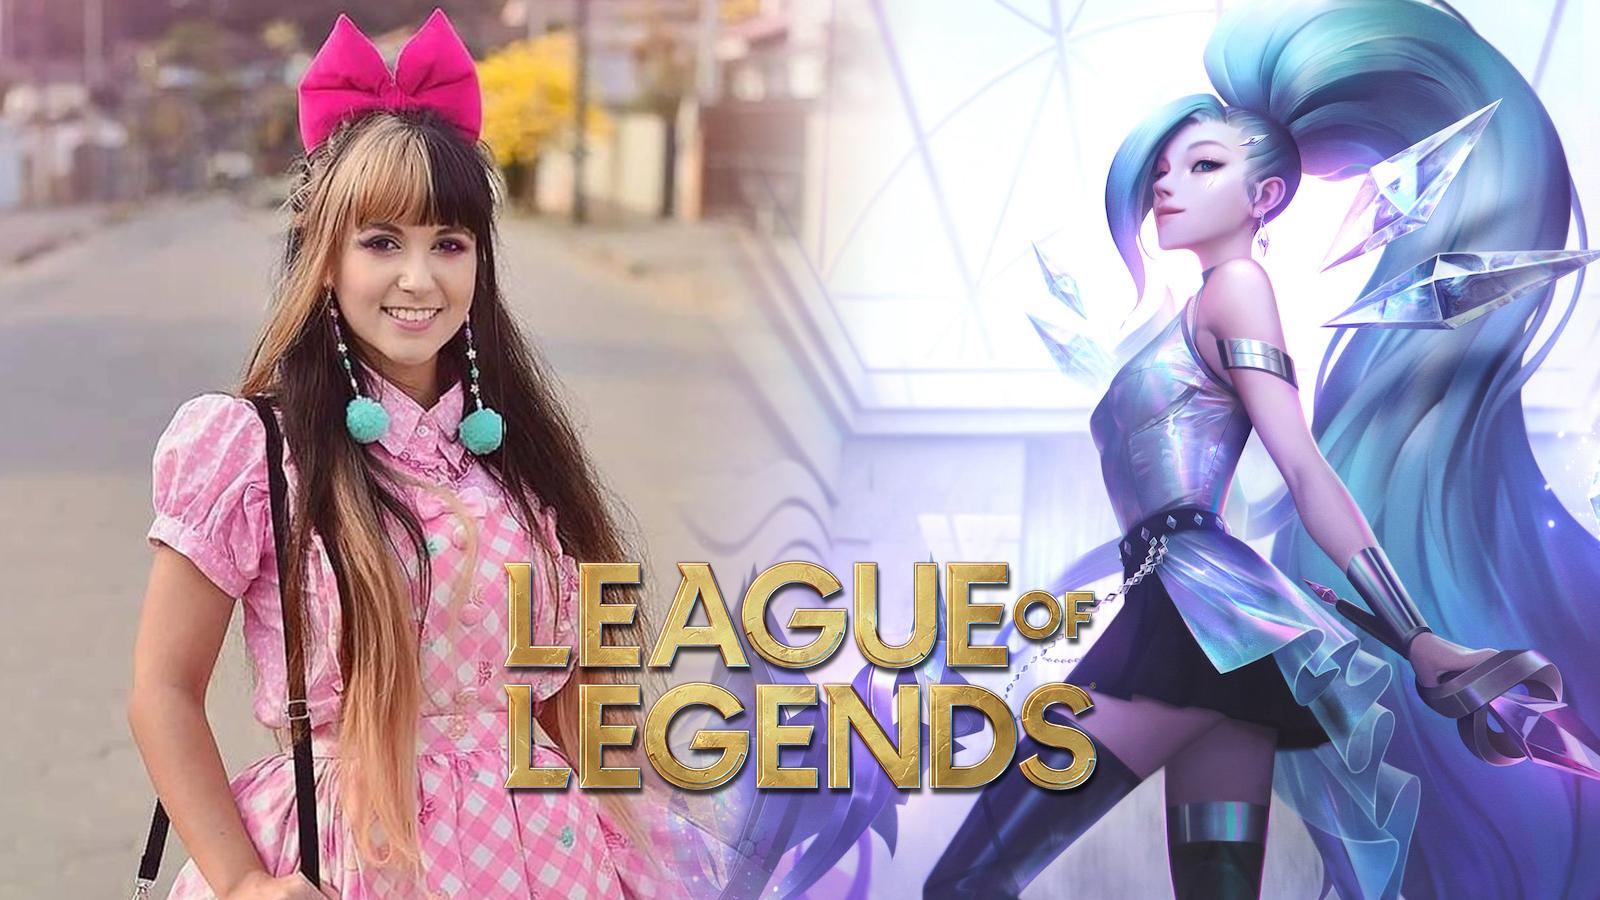 Cosplayer kitsuneraposa next to Seraphine in League of Legends